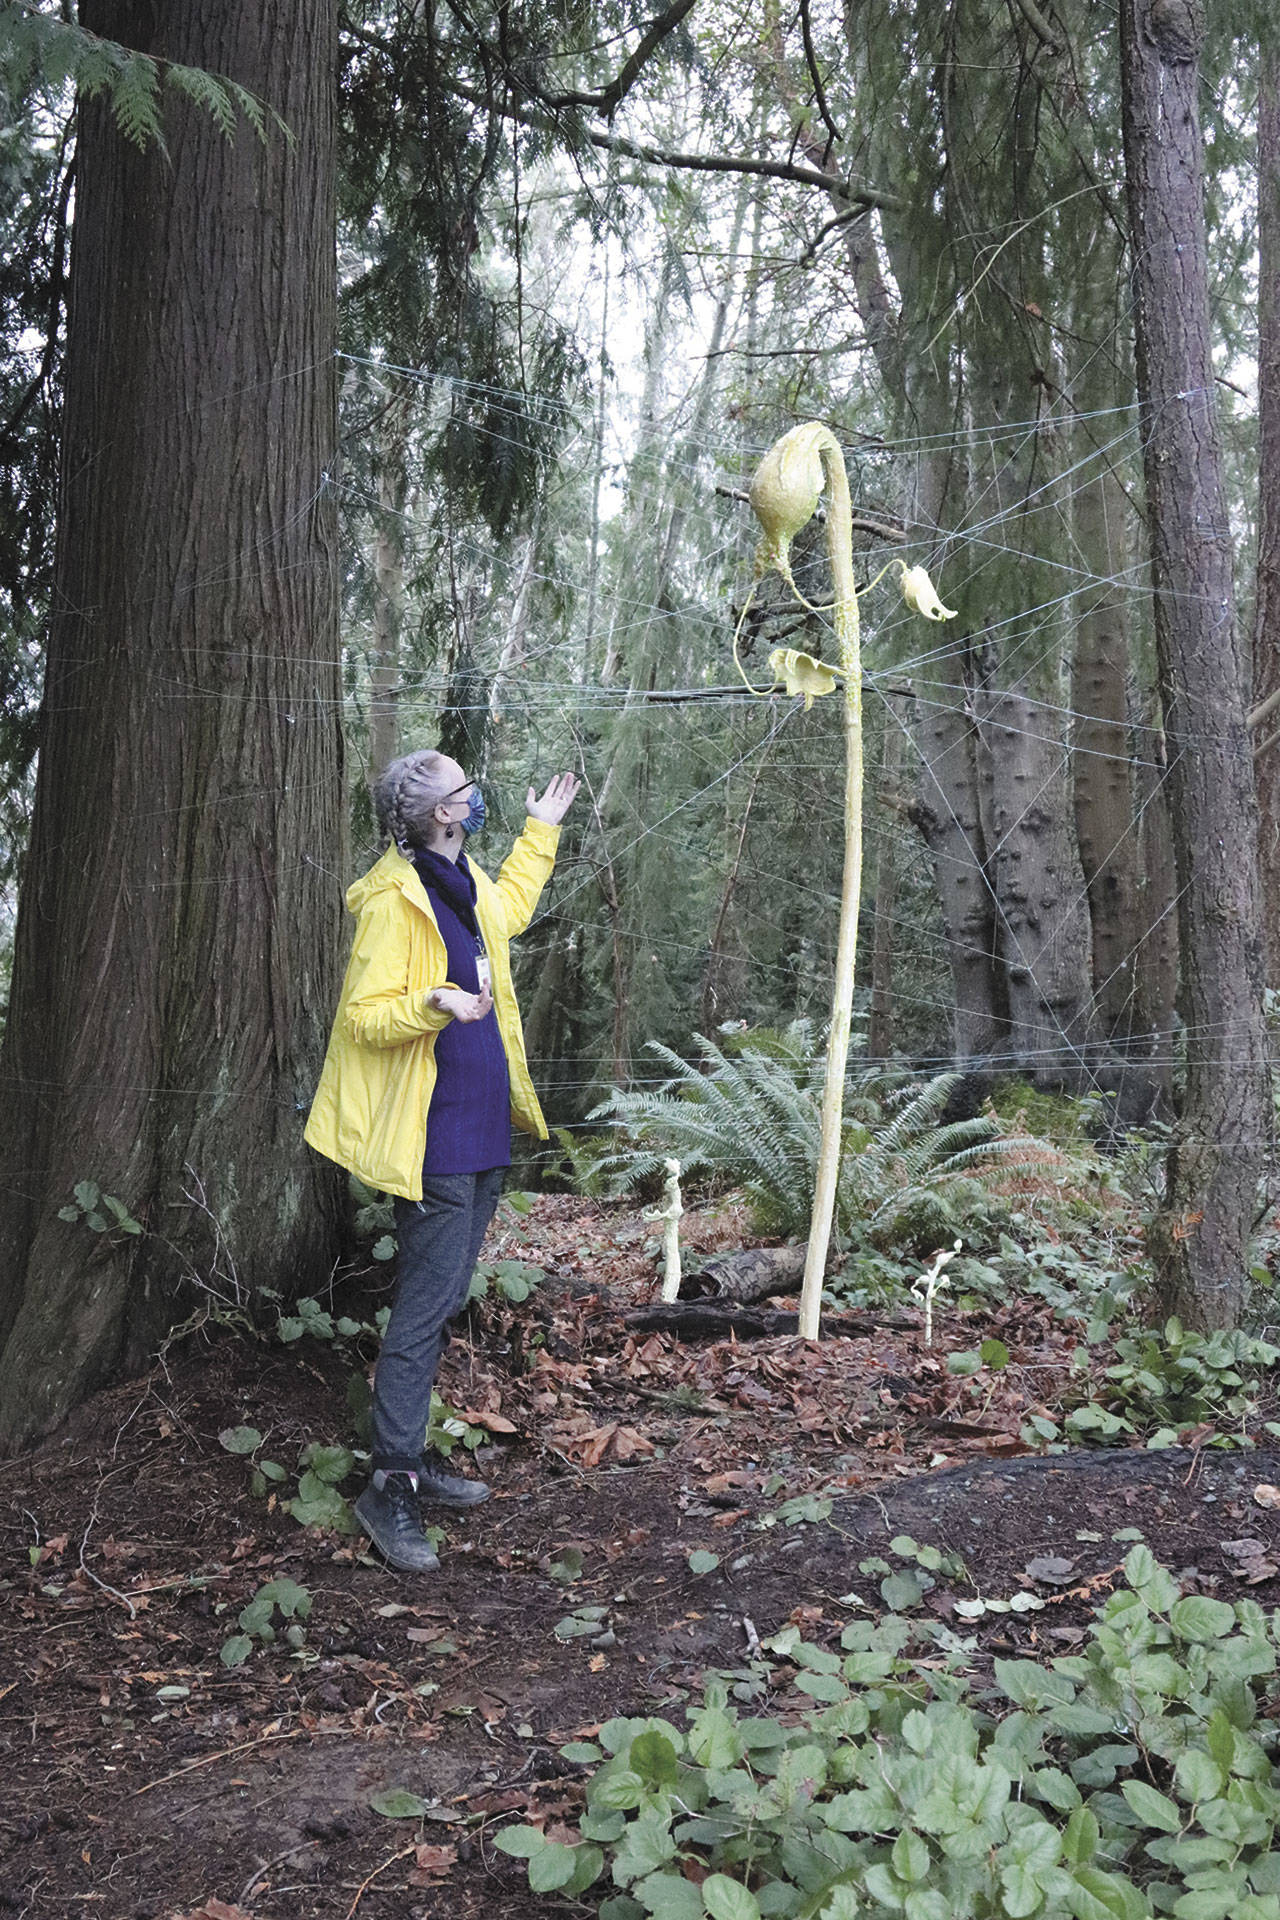 Sarah Jane, gallery and program director for the Port Angeles Fine Arts Center, conducts a “curator’s-eye-view” tour of Webster’s Woods. (Port Angeles Fine Arts Center)